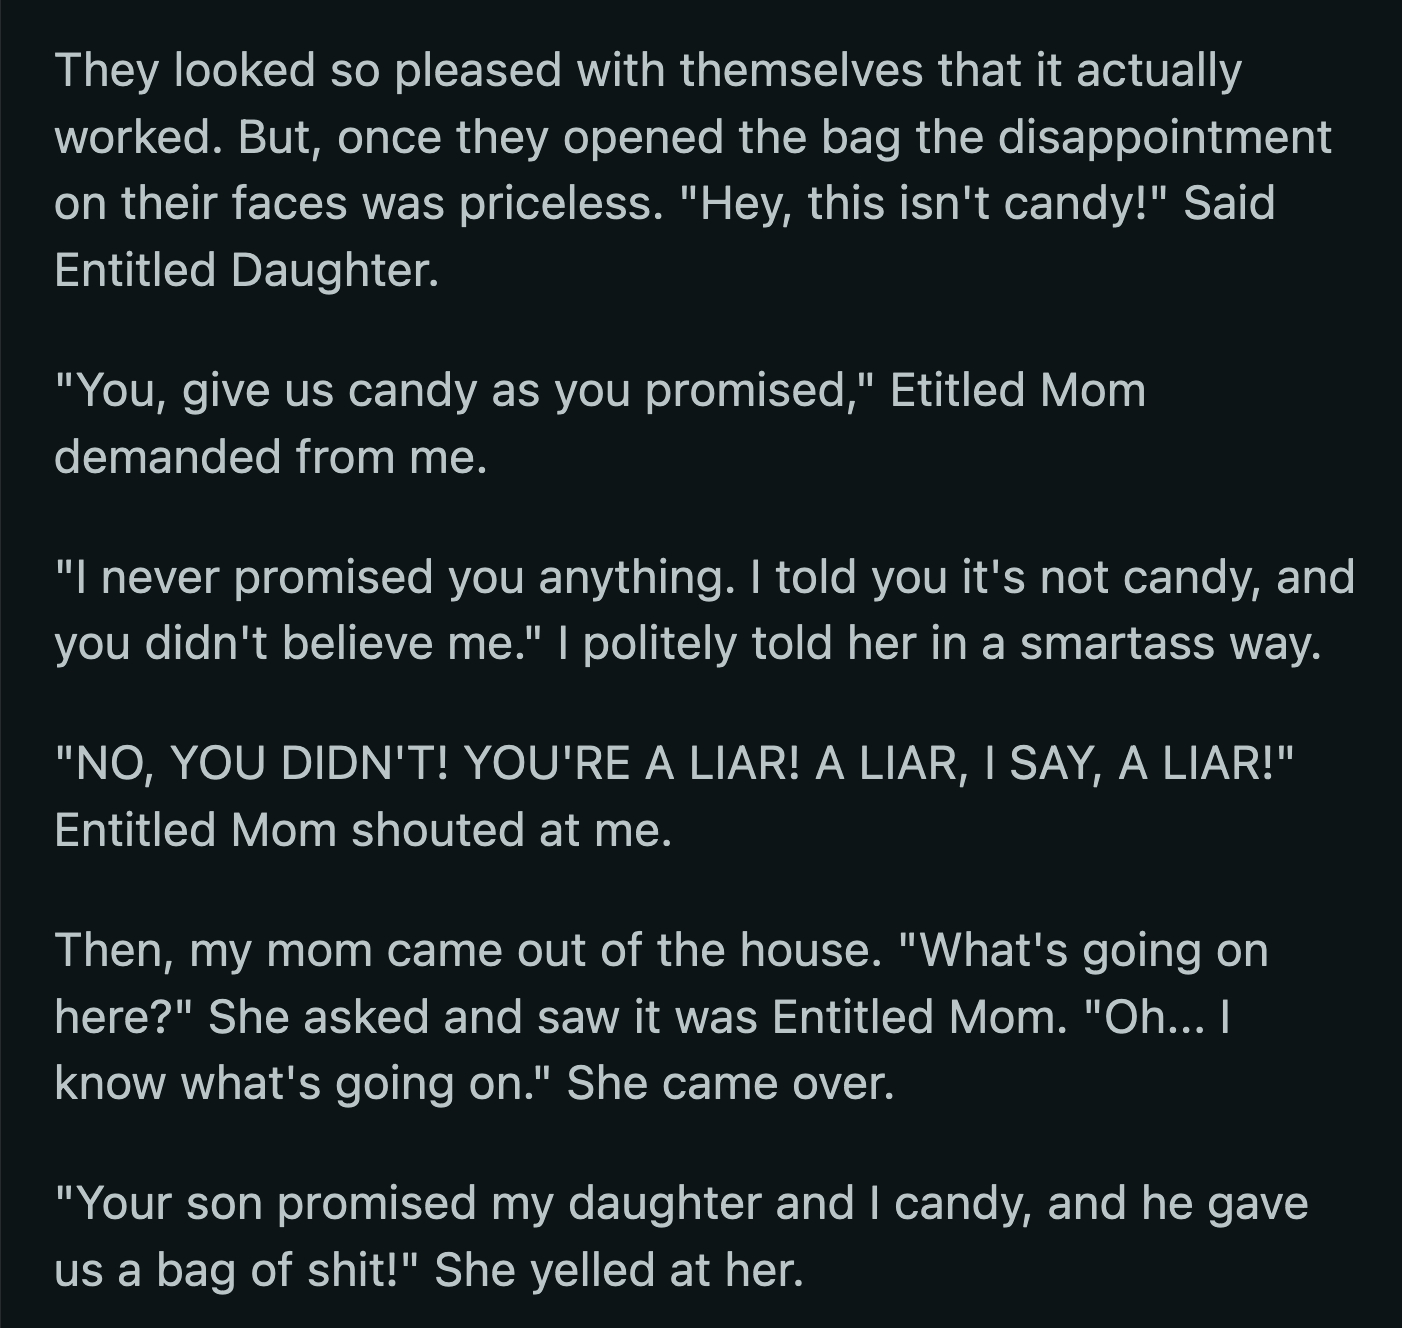 His mom intervened and asked what the commotion was about. OP's mom saw and realized her son had the misfortune of upsetting the local entitled lady.